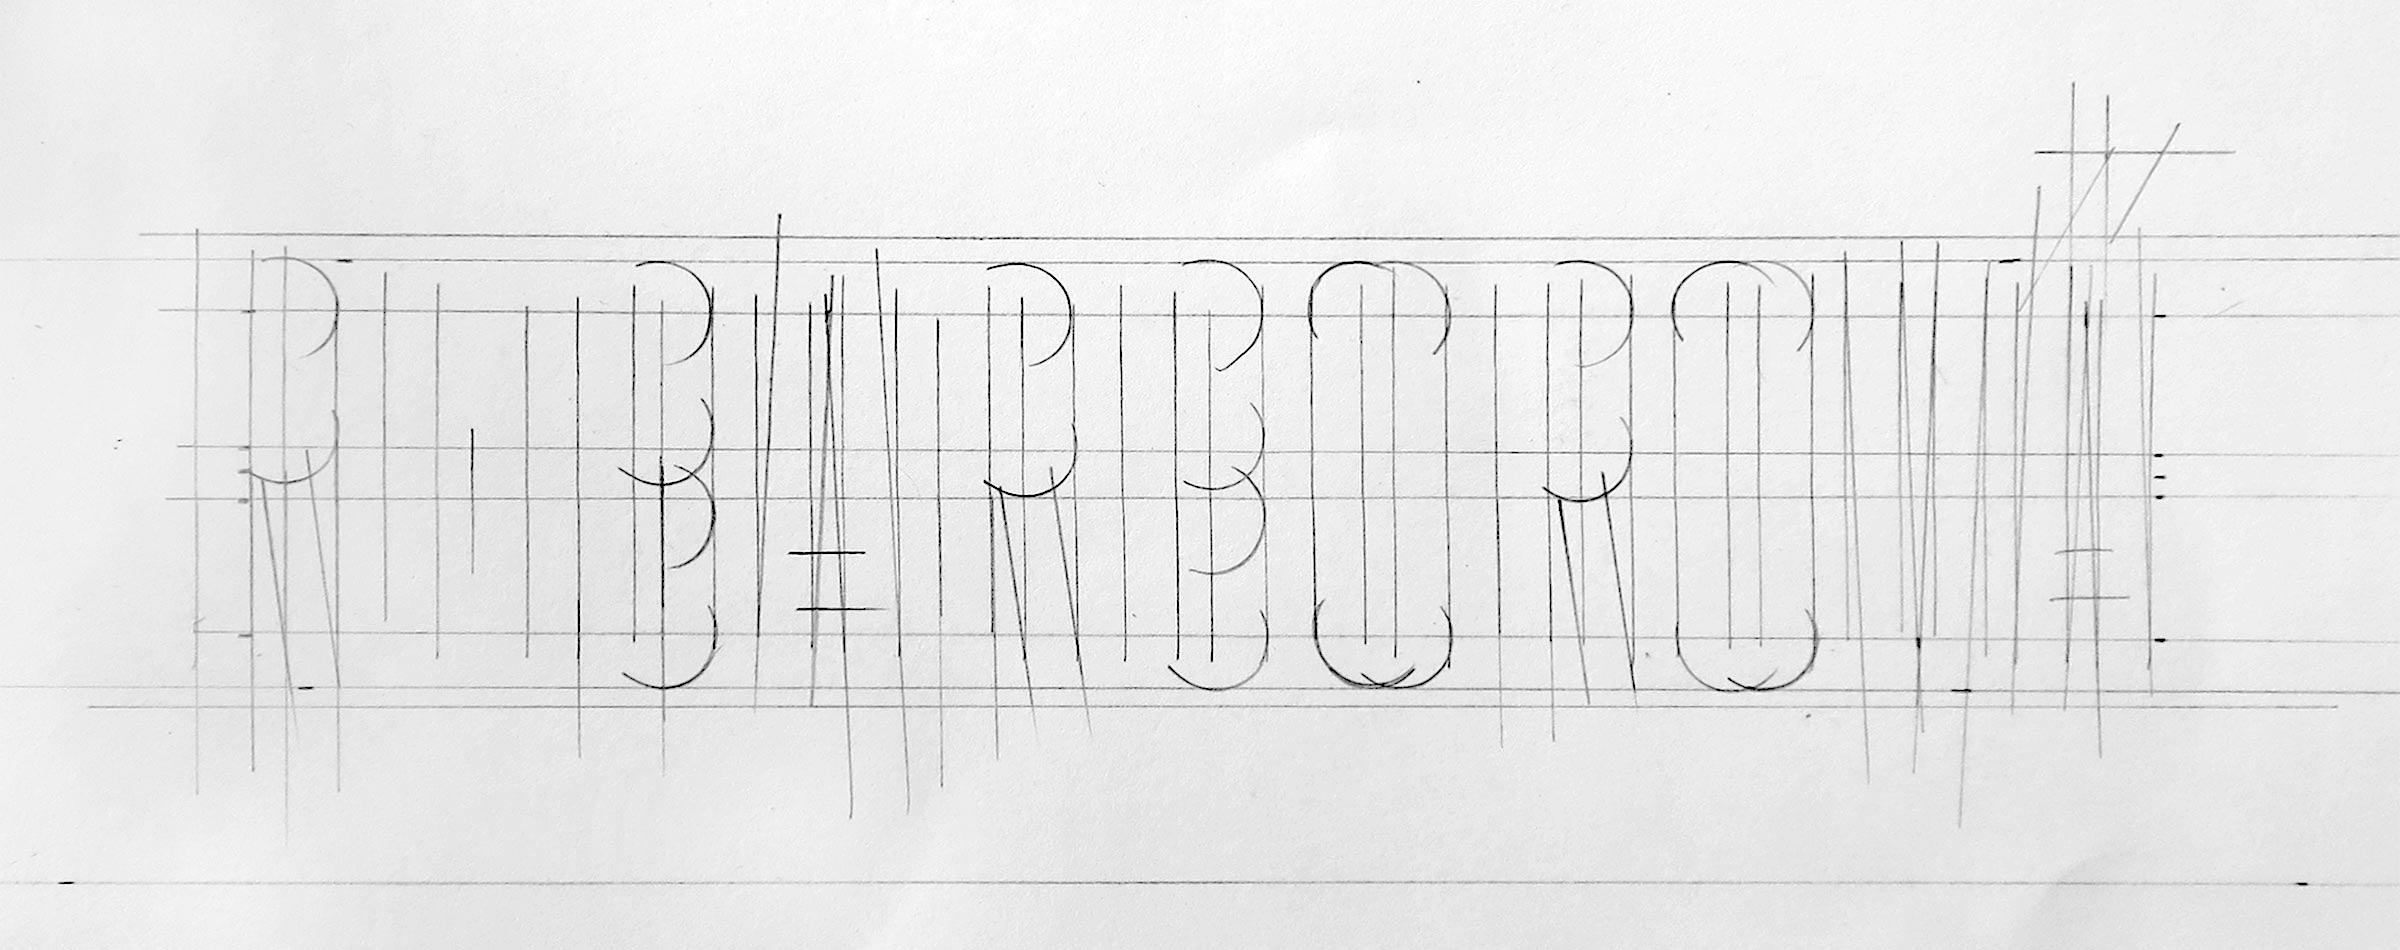 Straights and circles – This is how the street name Rebarborová looks like before cutting the stencil.